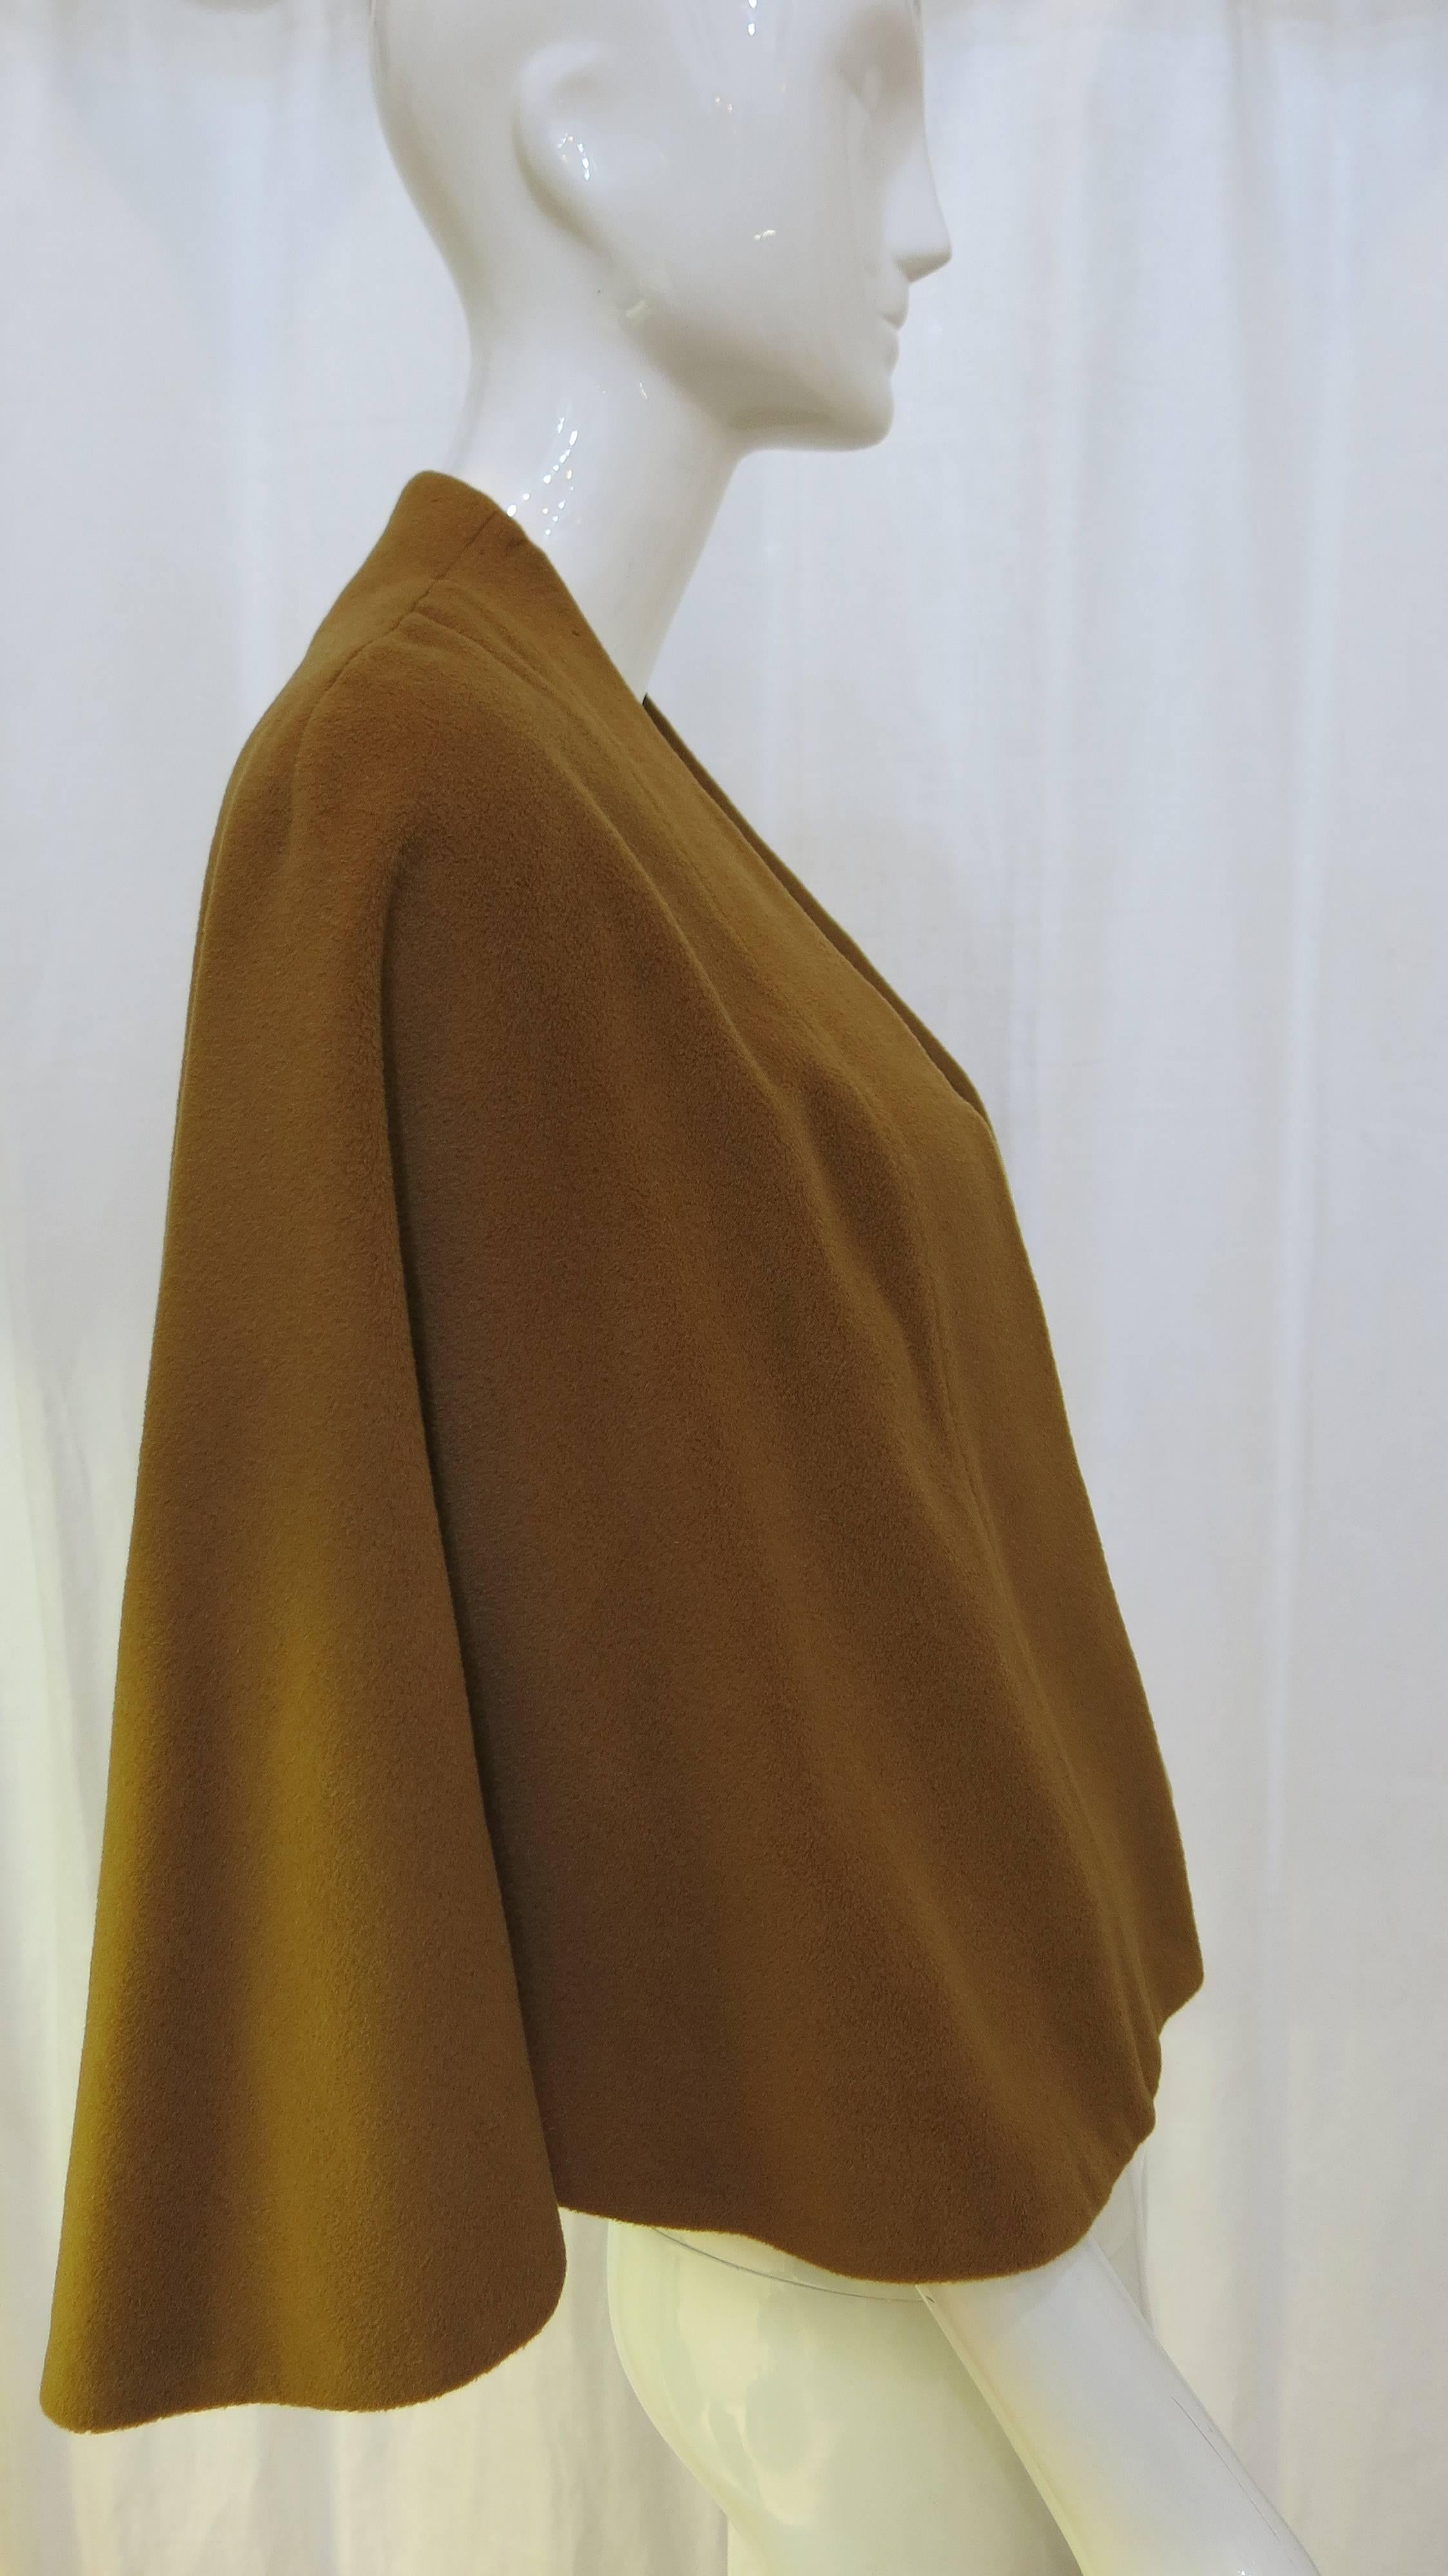 Chestnut brown silk lined open cape made from velvety vicuna wool.

The cape is in great condition with only a few very small marks in the fabric.

Could be paired with a brooch or a clothing pin for closure or simply left to rest on the